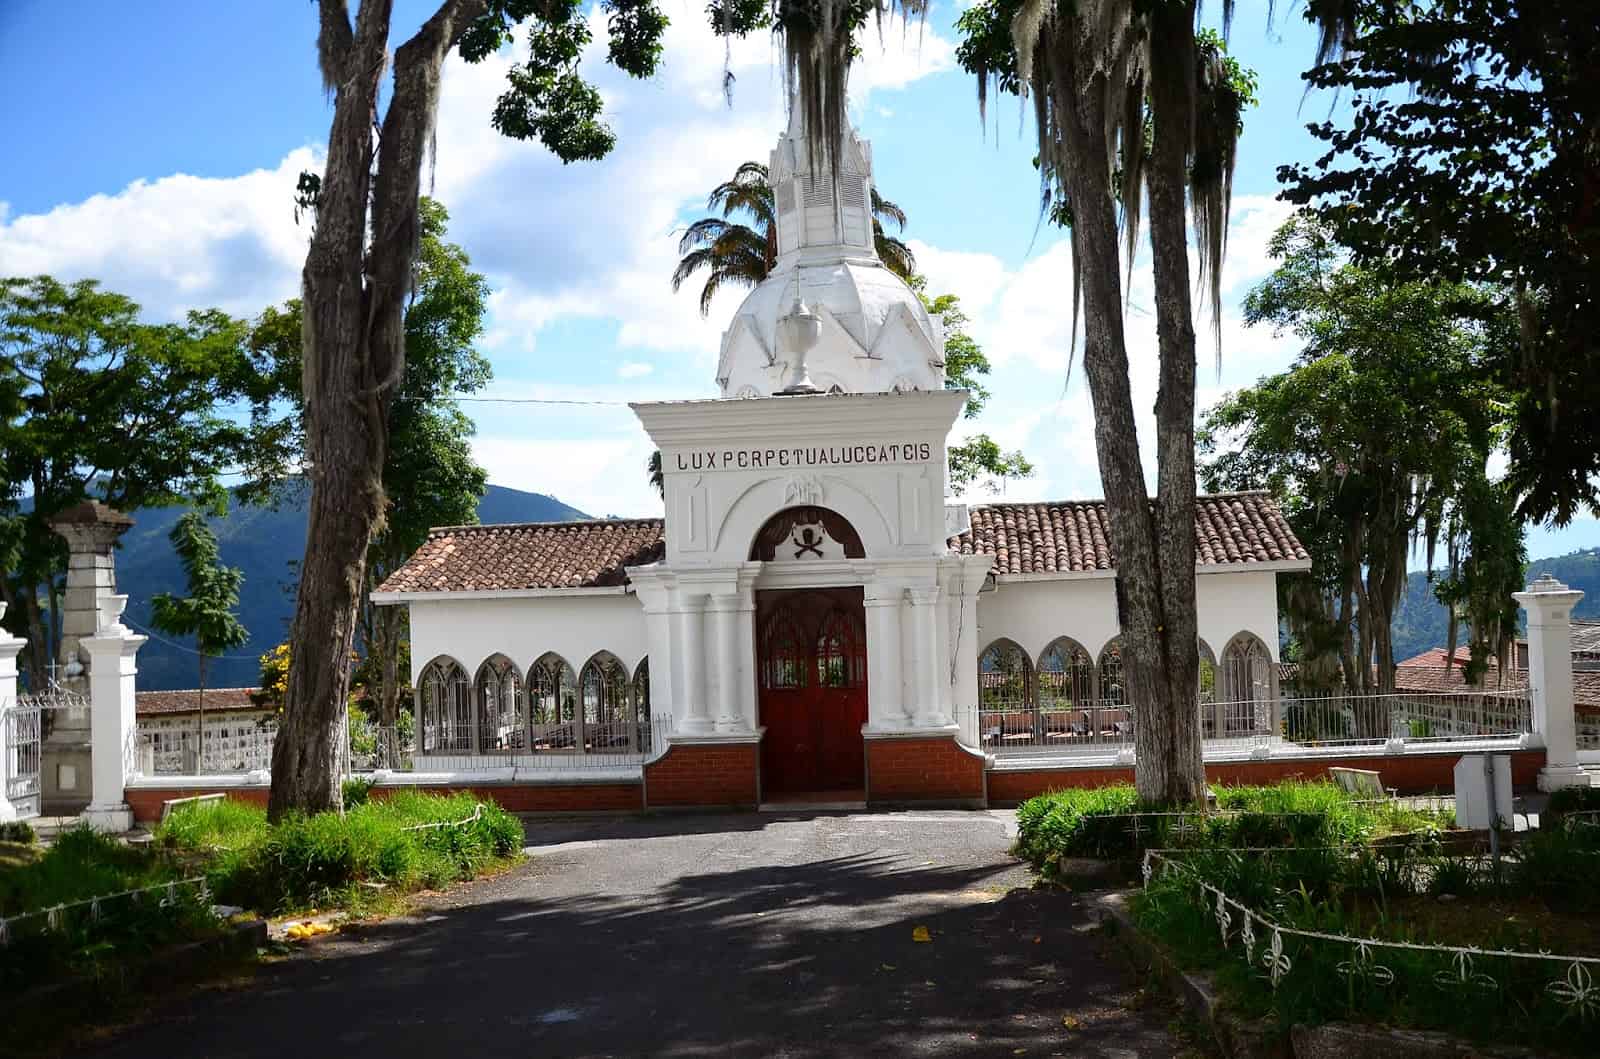 Entrance to the cemetery in Salamina, Caldas, Colombia